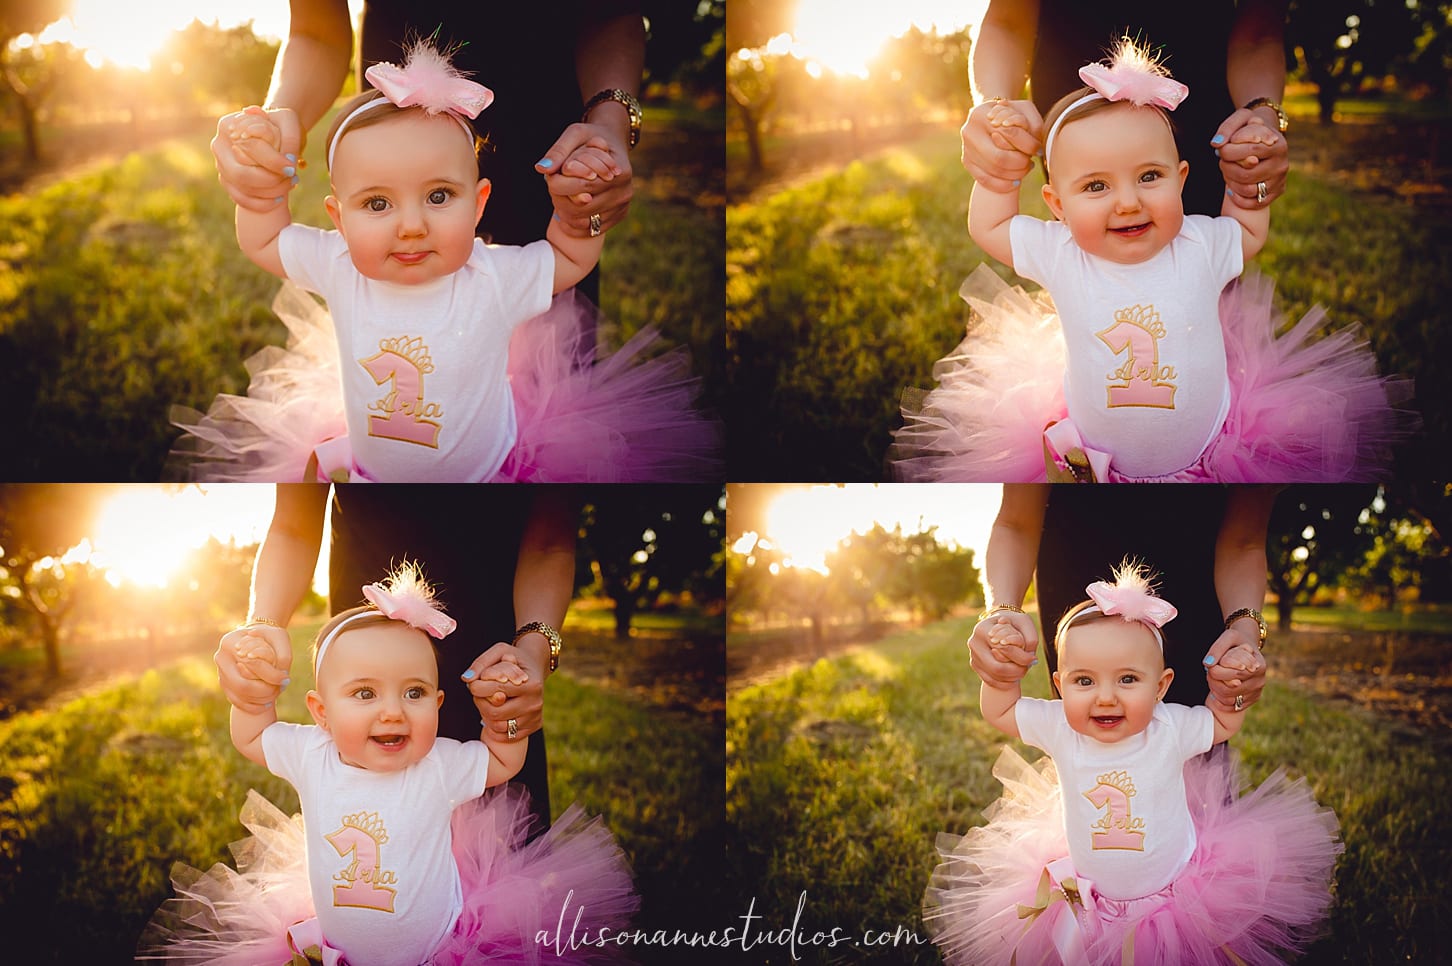 Aria, cake smash, first birthday, pink tutu, pearls, giggles, gift certificate, new family, Allison Gallagher, Best Photographer South Jersey, Hammonton, South Jersey, AllisonAnne Studios, love 